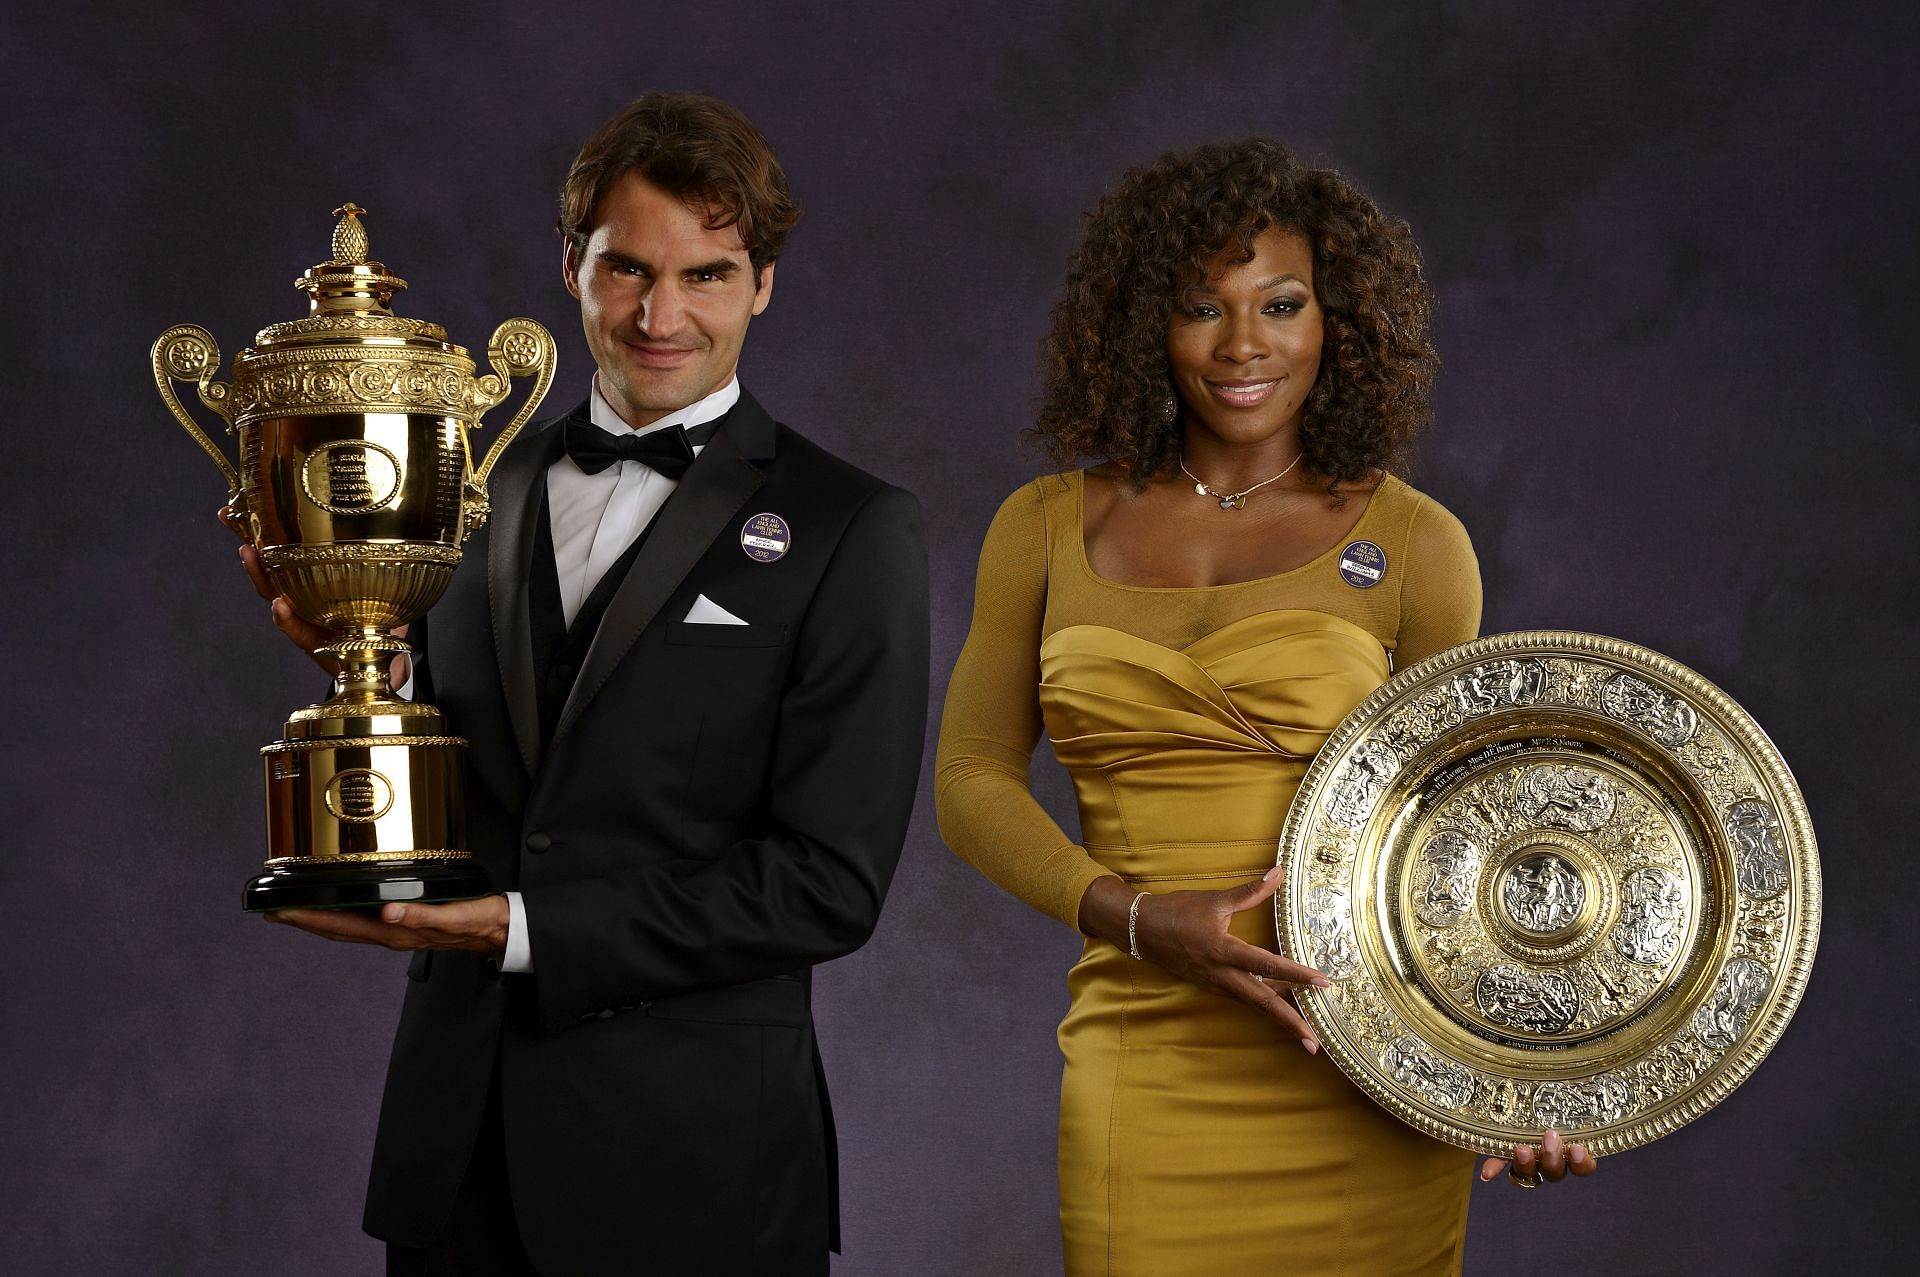 Wimbledon Championships 2012 Winners Ball featuring Roger Federer and Serena Williams